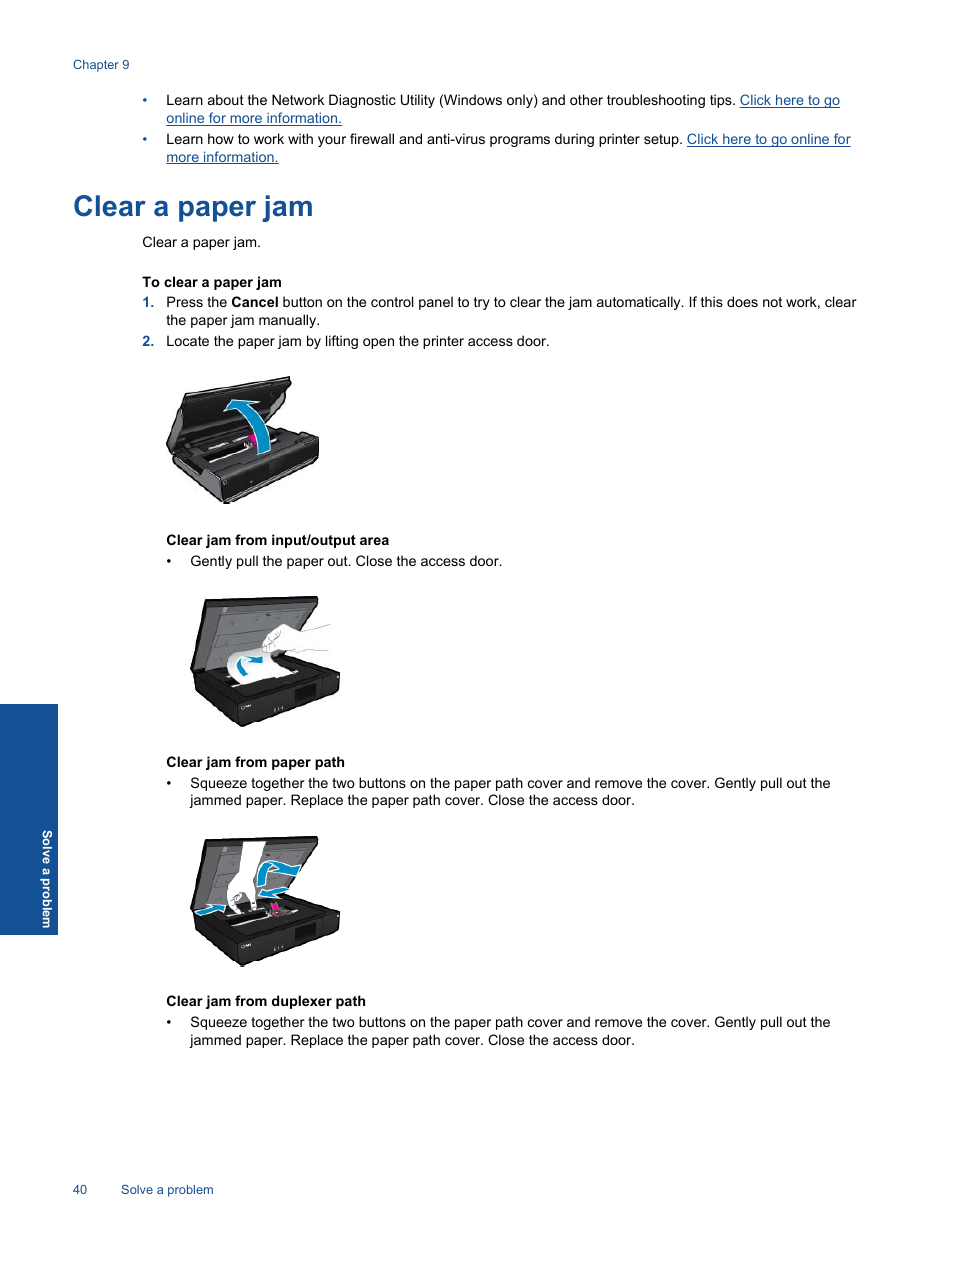 Clear a paper jam | HP ENVY 120 e-All-in-One User Manual | 42 / 62